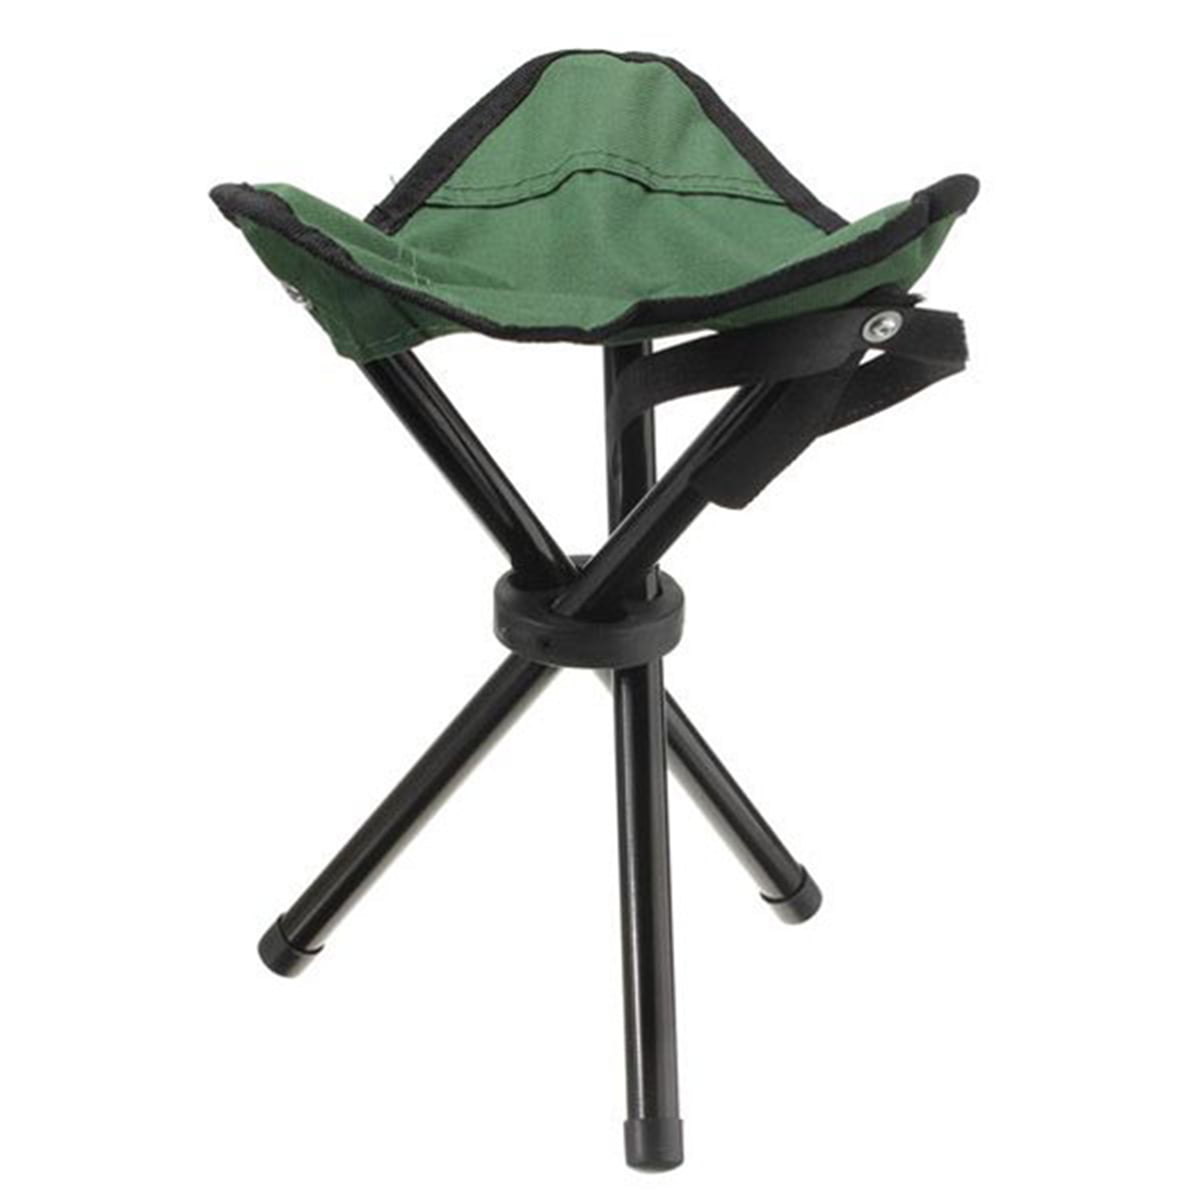 Folding Seat Tripod Portable Travel small Chair Fishing Outdoor Camping Stool